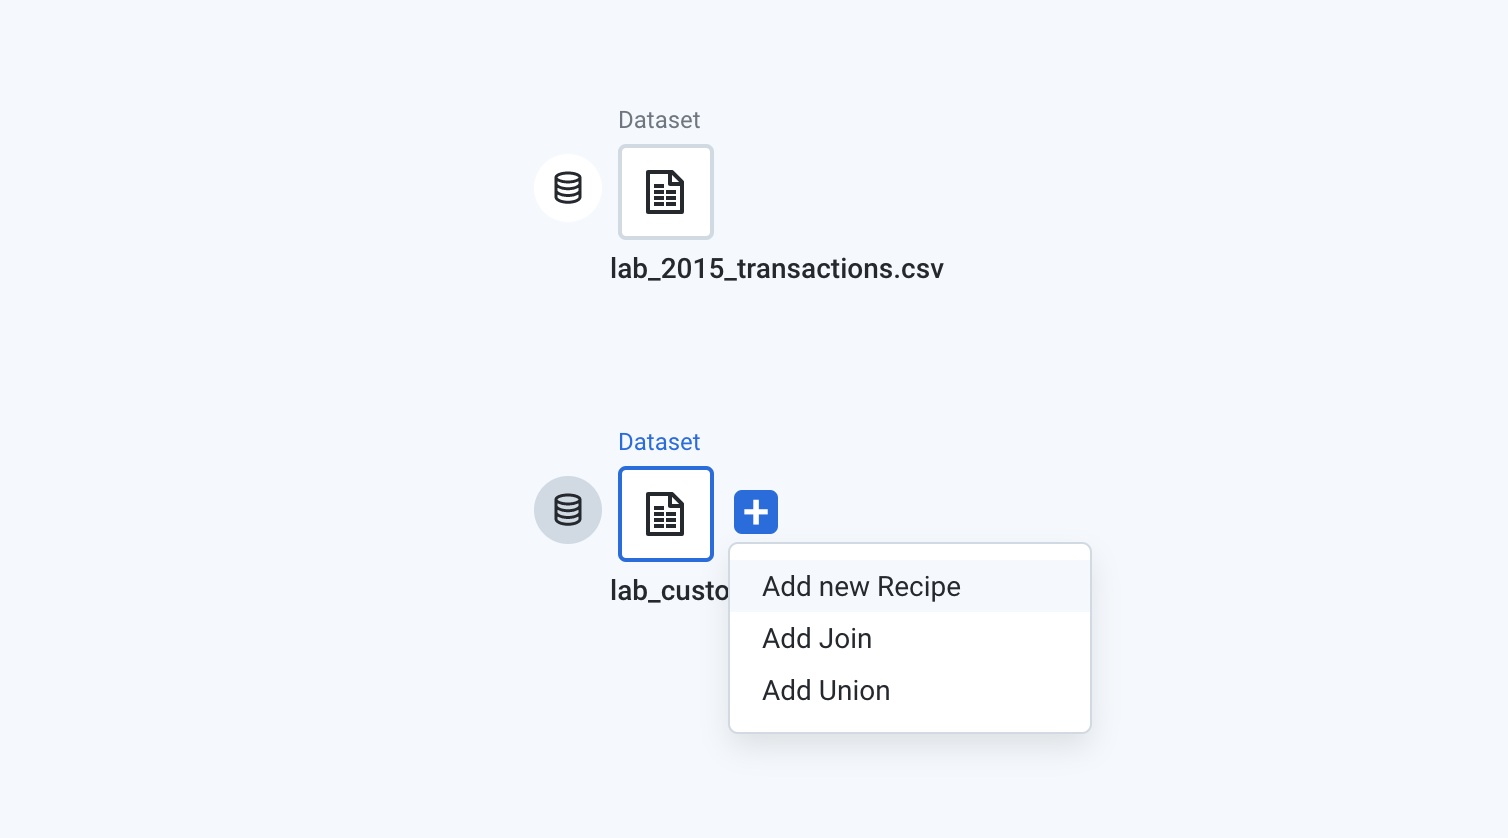 2 datasets, lab_2015_transactions.csv and lab_customers.csv, with the expanded menu displayed for lab_customers.csv